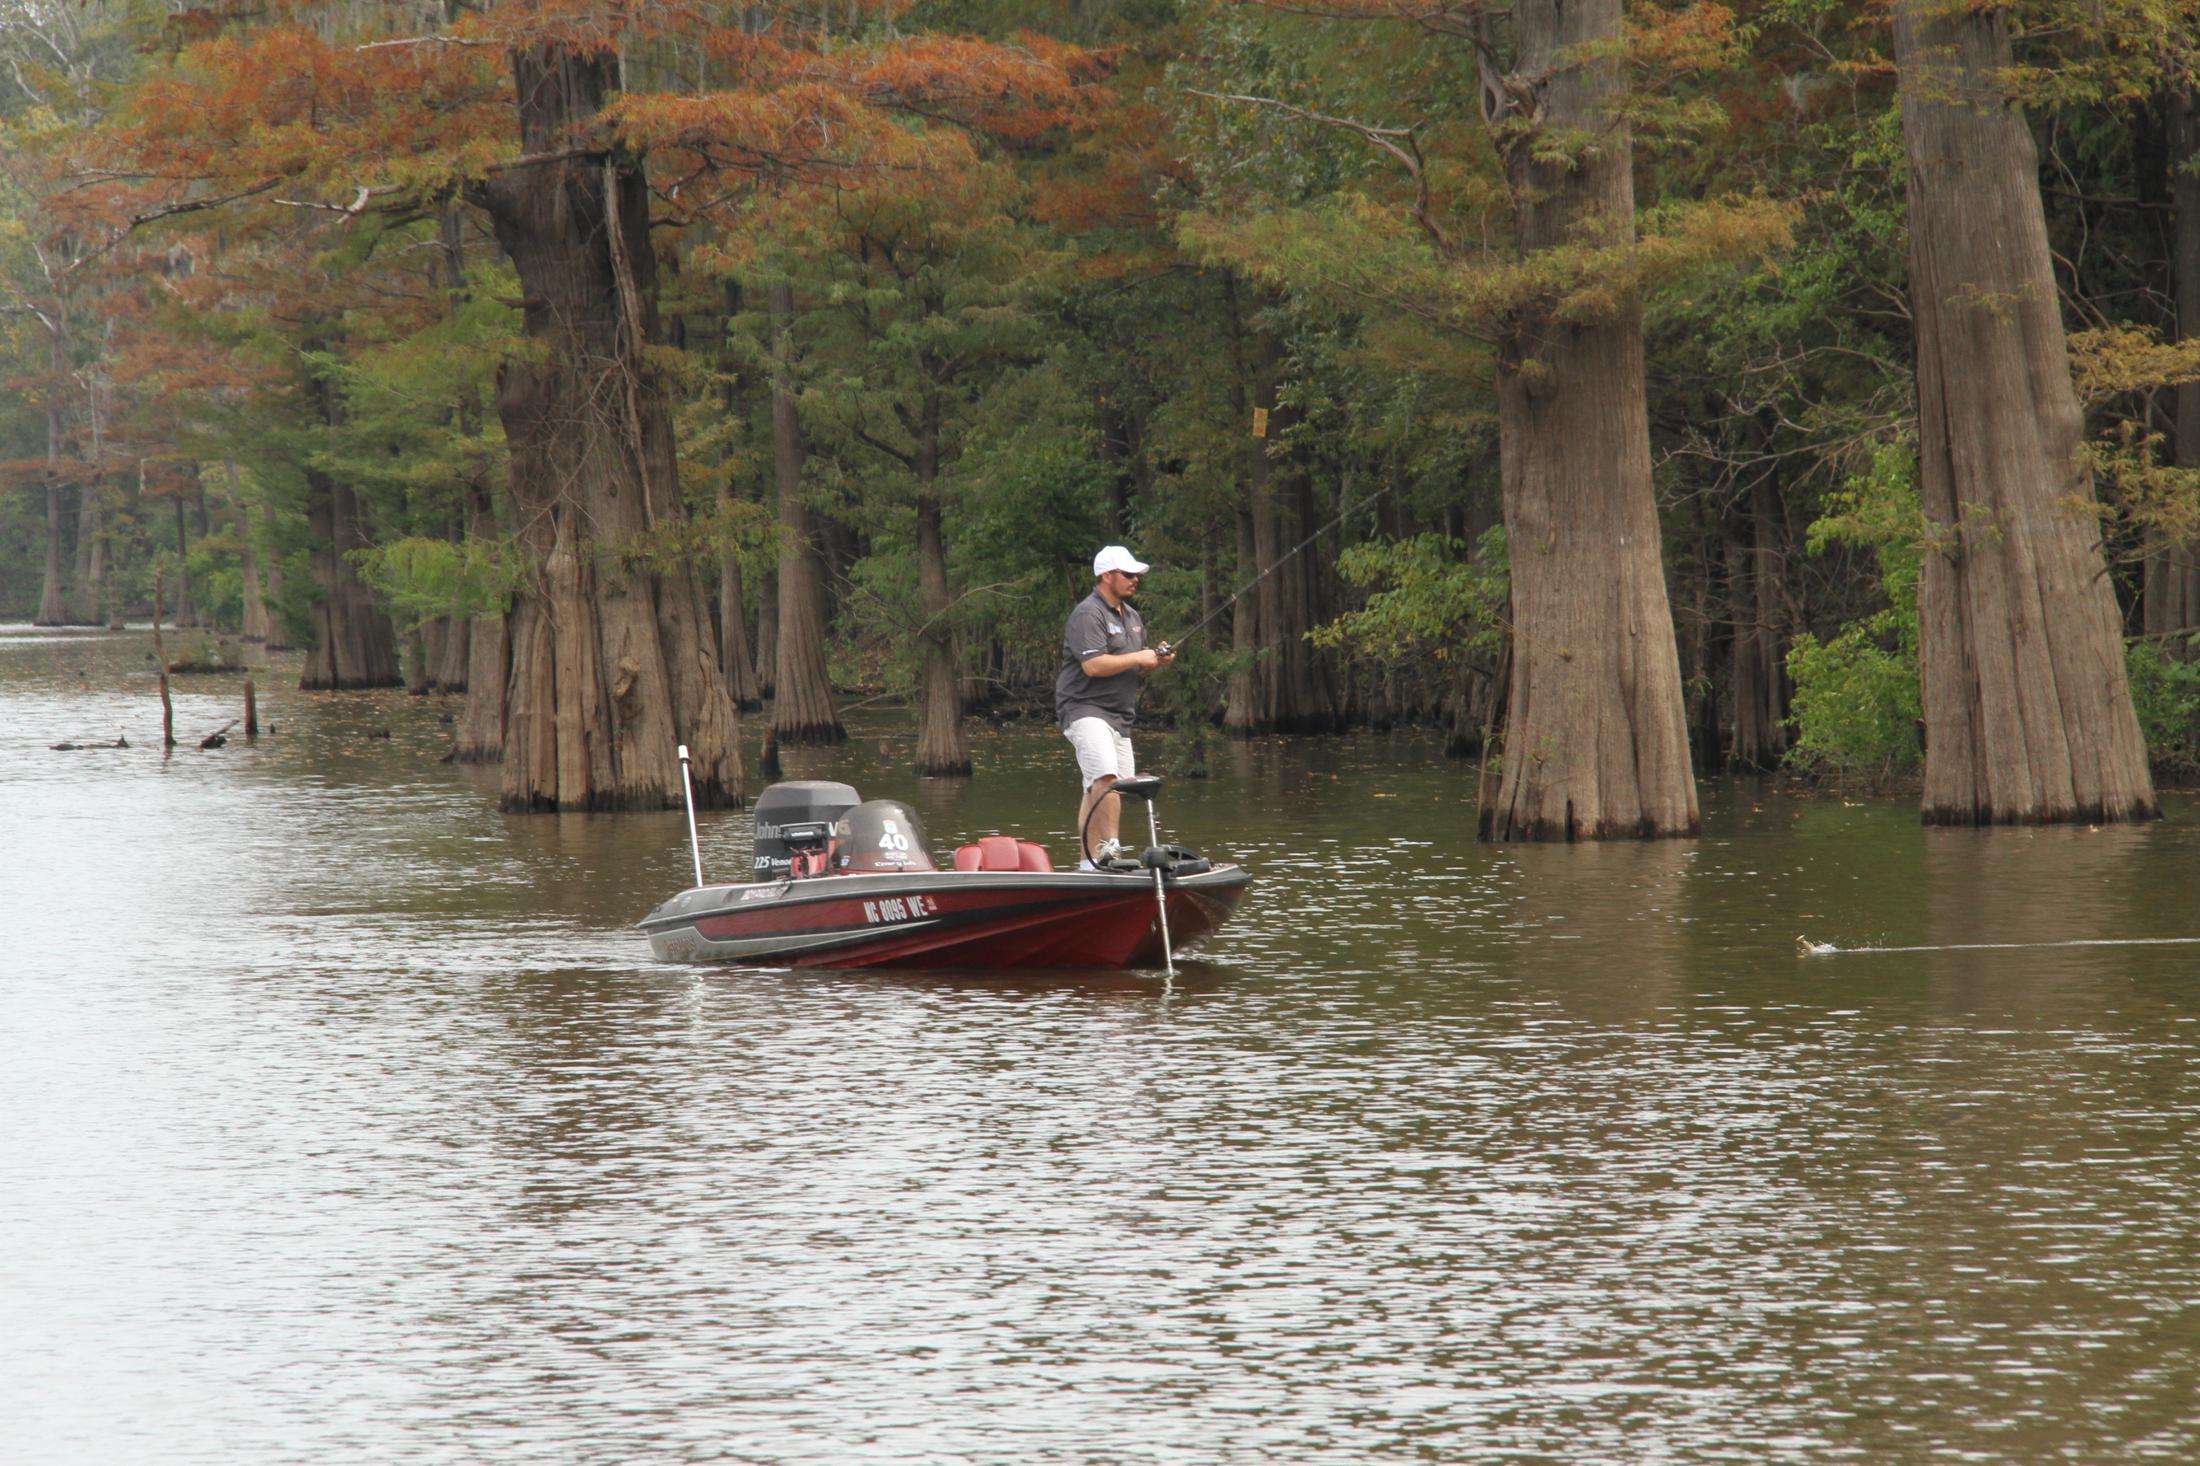 The first angler we come to is Roger Thomas from North Carolina.